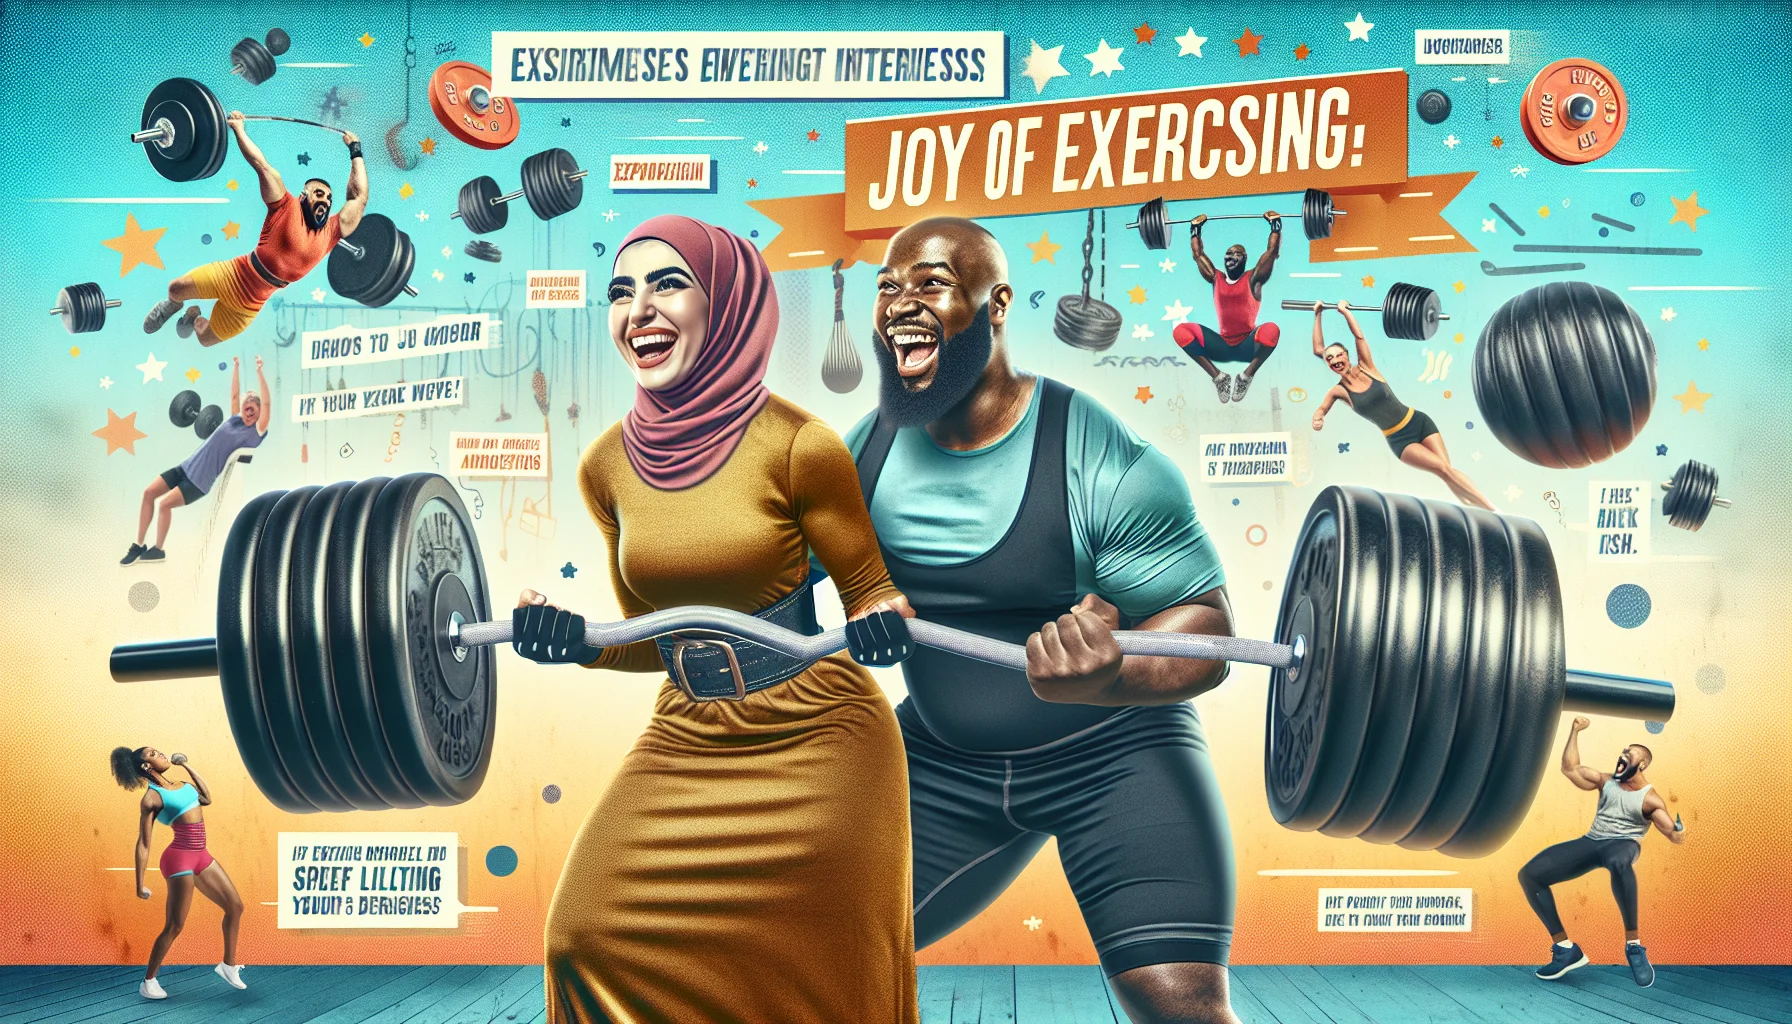 Create a vibrant and humorous image depicting a powerlifting event in a gym. The scene features a confident Middle-Eastern woman and a Black man attempting to lift incredibly exaggerated oversized dumbbells. They both have grins on their faces and are clearly having fun, demonstrating that powerlifting isn't just about seriousness and strength, but can also be enjoyable. The background contains inspirational quotes on fitness and joy of exercising, to motivate viewers and spark an interest in exercise and healthy living.